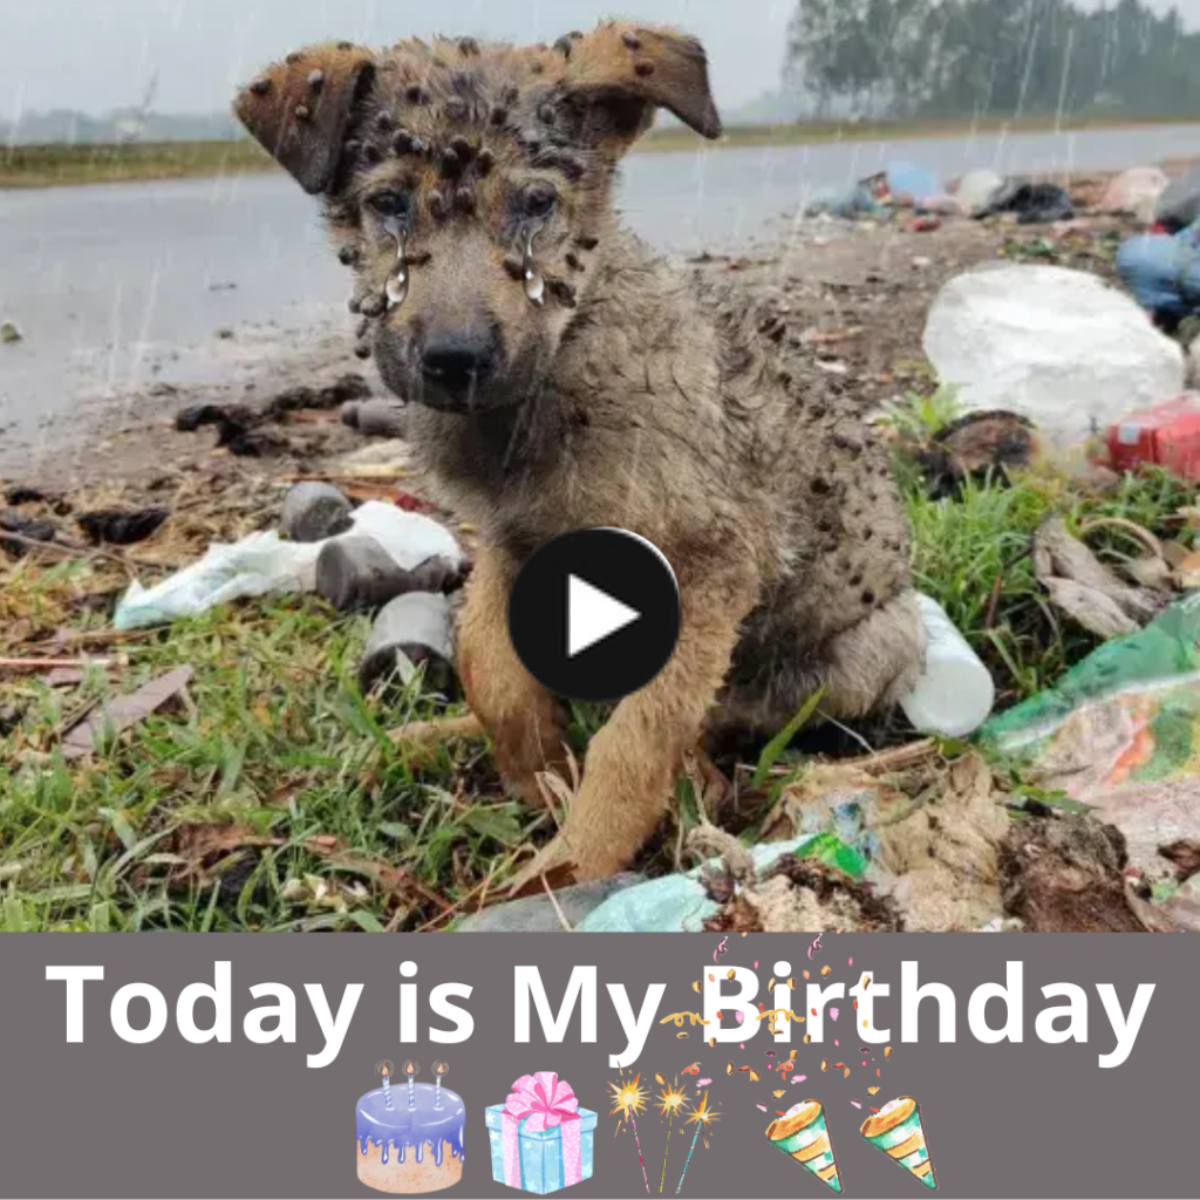 Finding Hope and Resilience Amidst Desperation and Uncertainty: The Story of A Stray’s Birthday